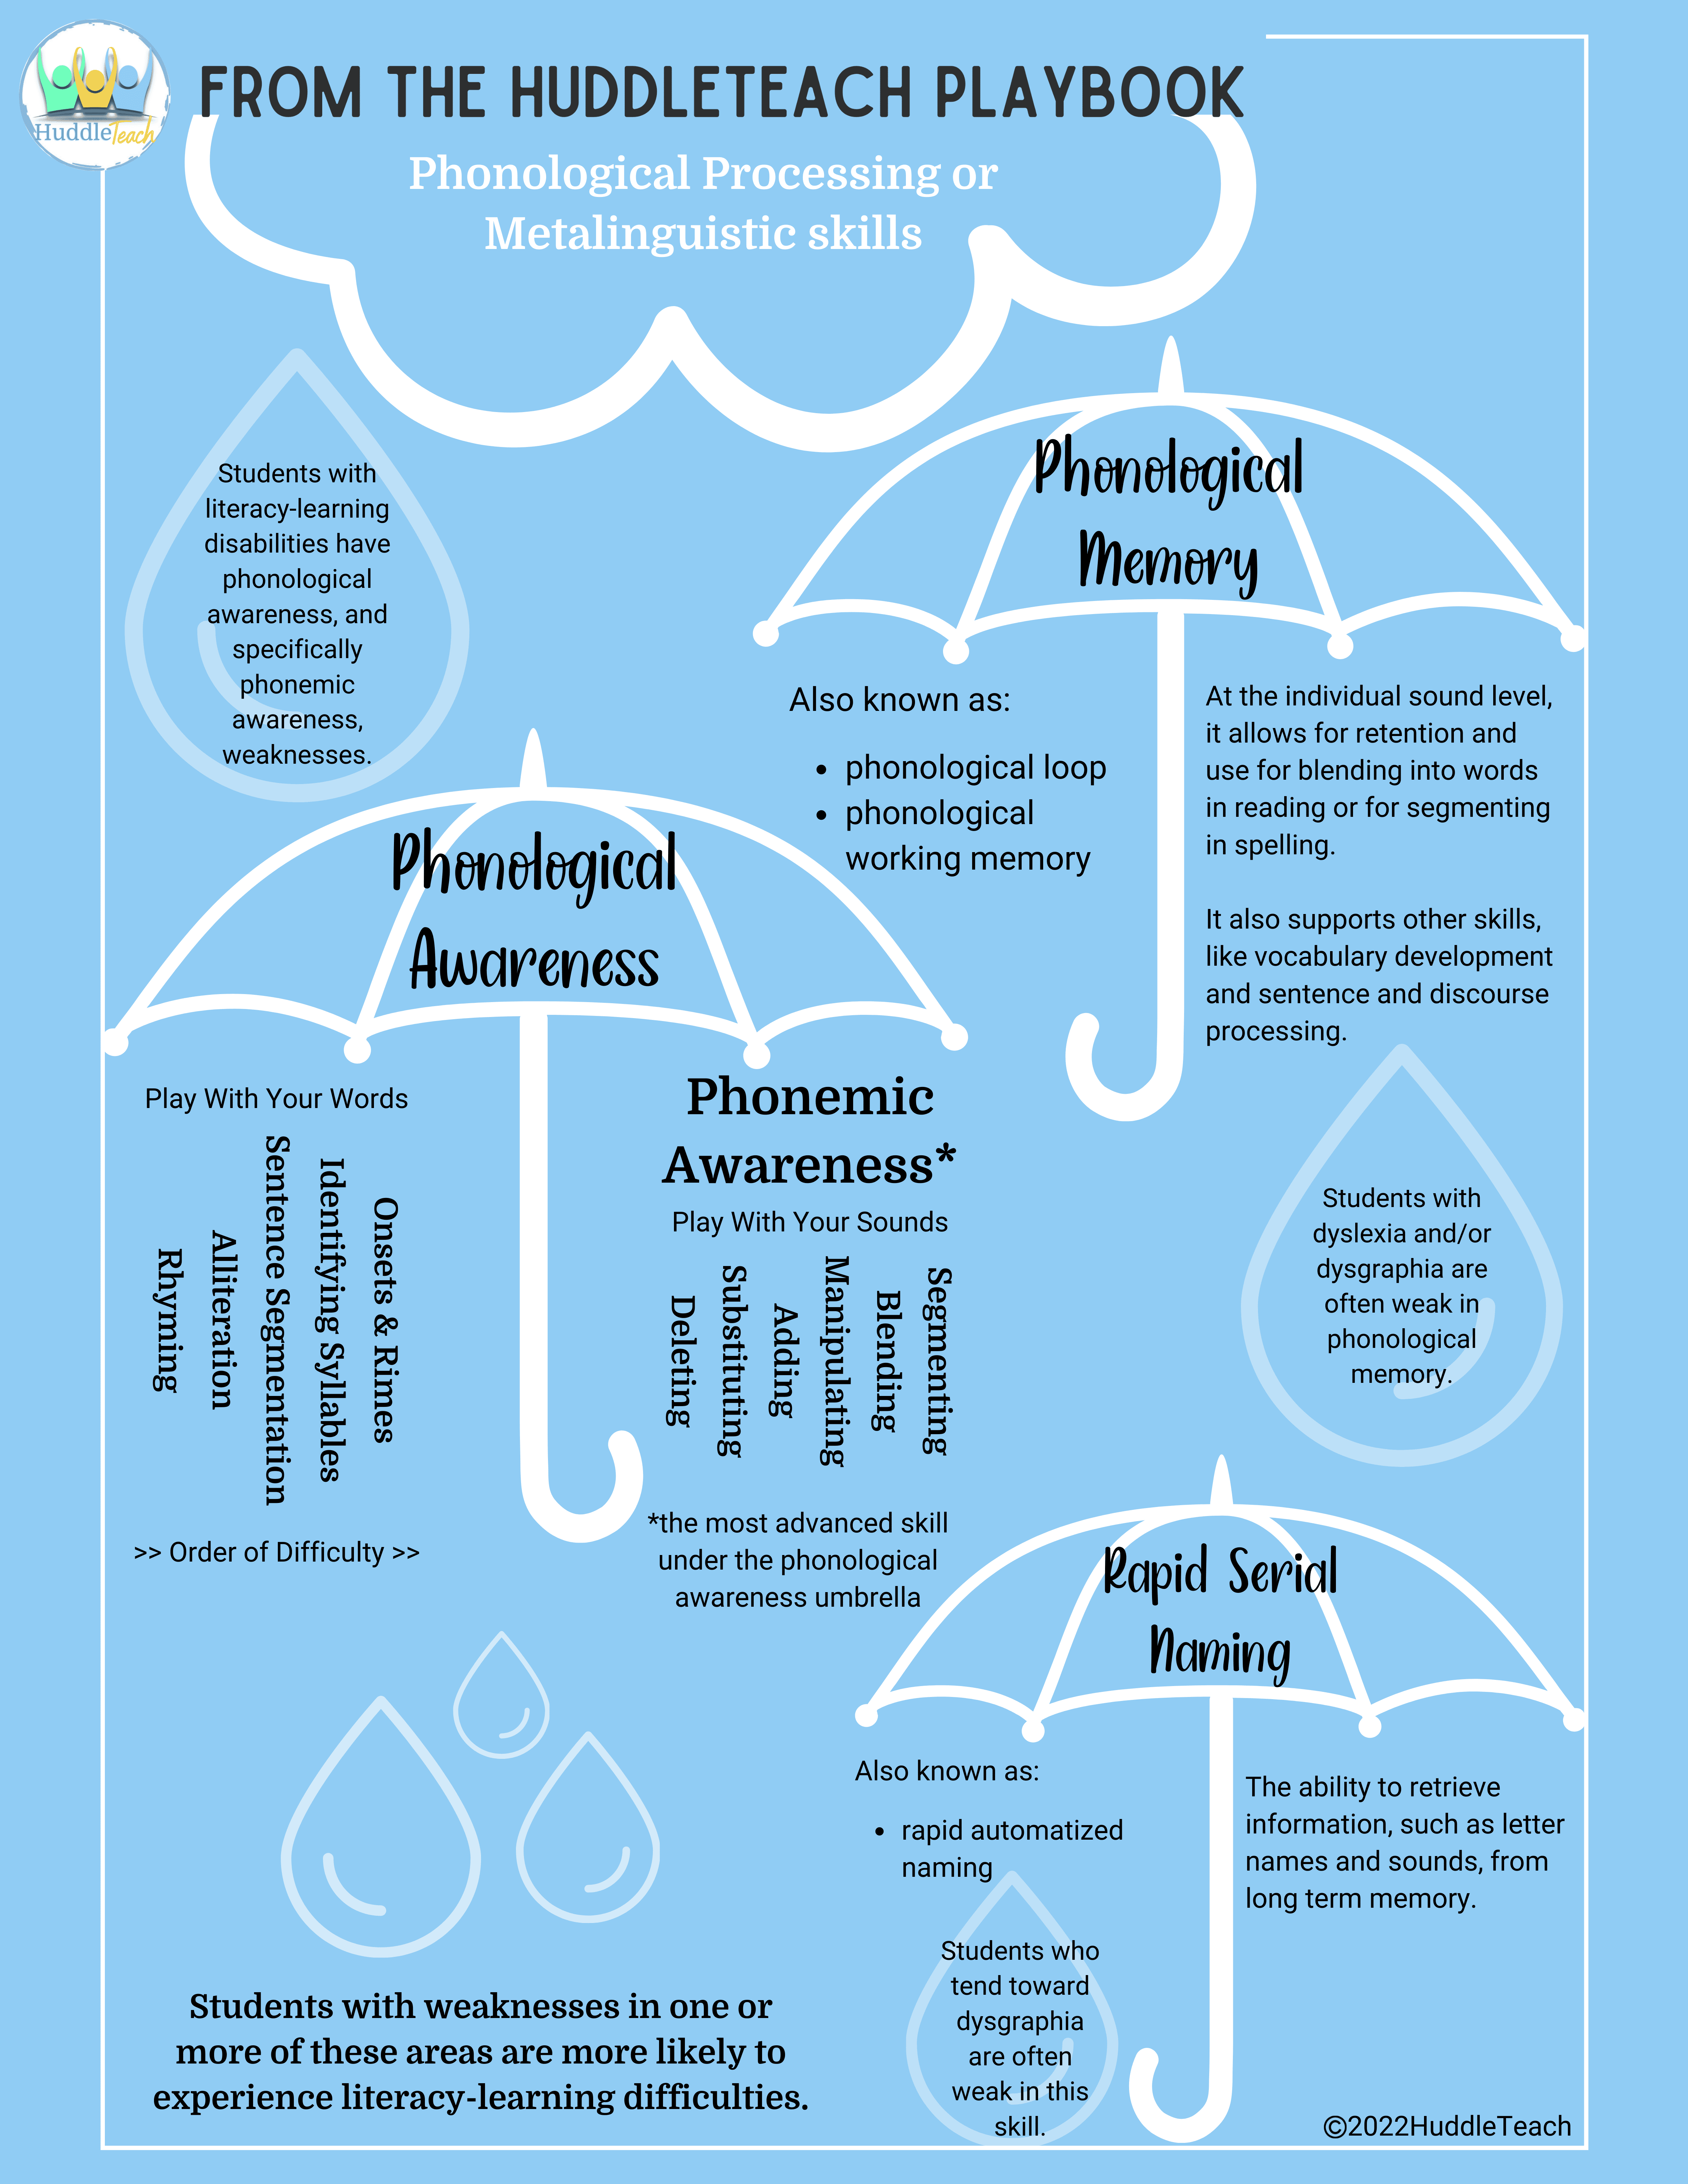 Chart with cloud and umbrellas showing the three components of metalinguistic skills of phonological and phonemic awareness, rapid serial naming, and phonological memory